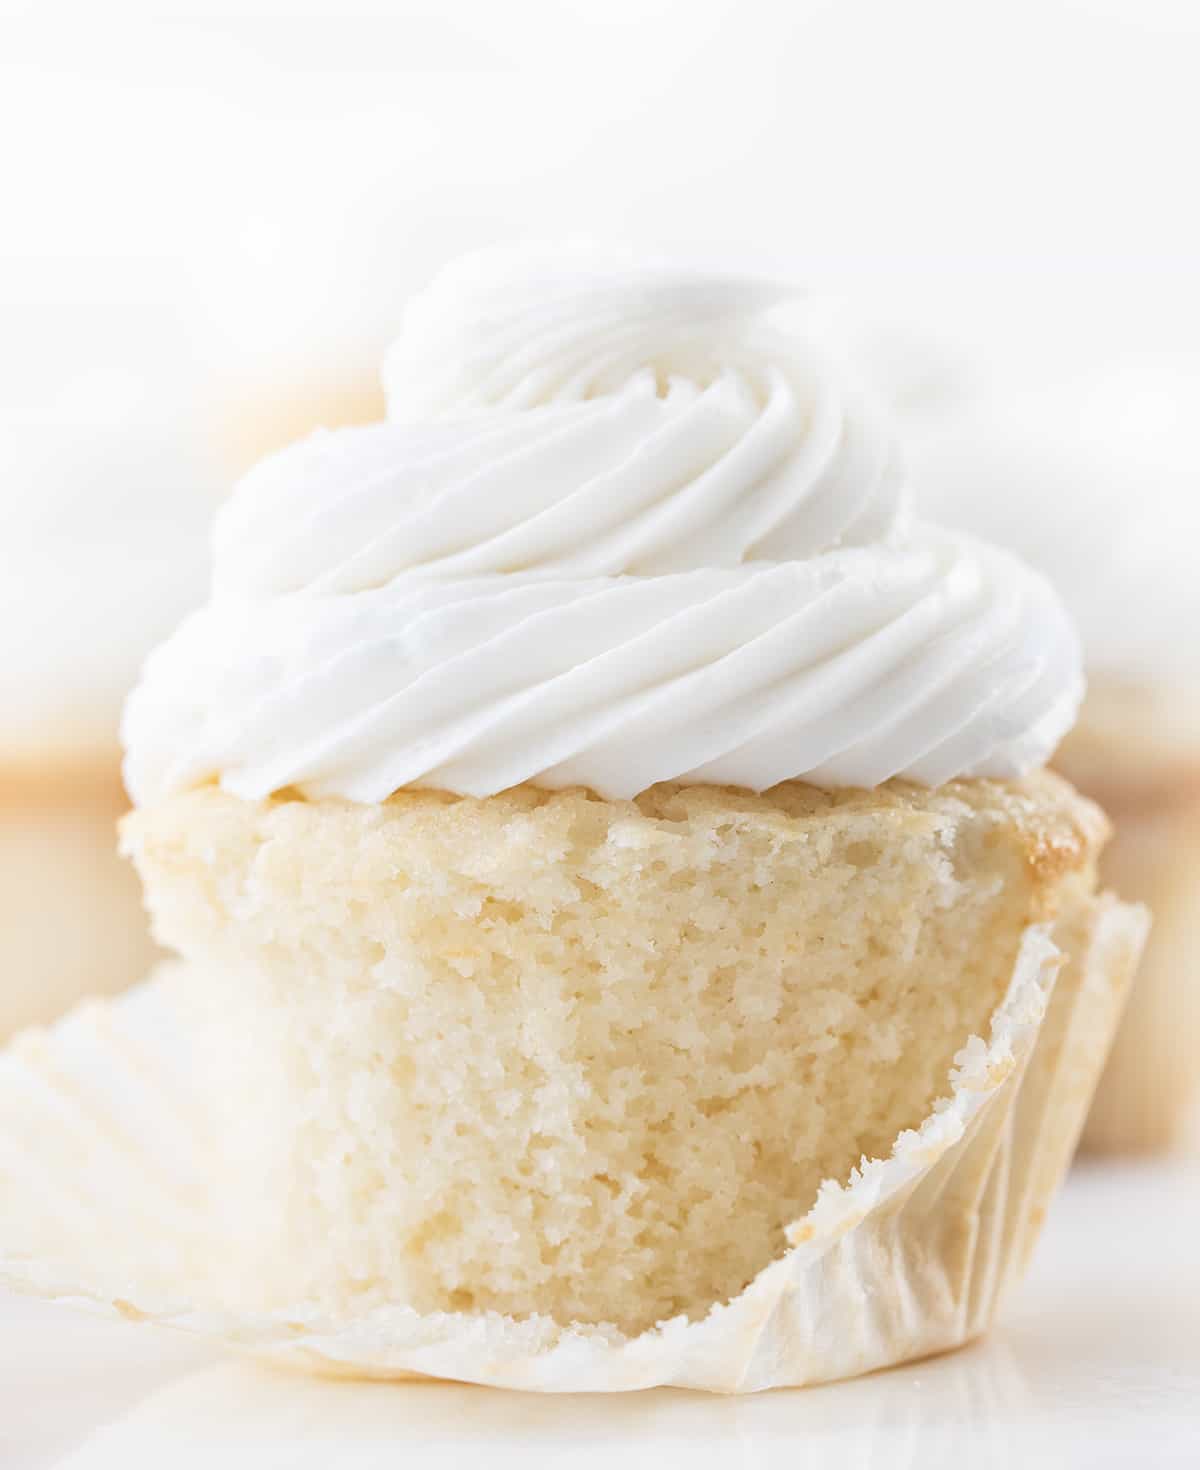 White Cupcake with Wrapper Removed Showing Texture of Cupcake and Covered in Vanilla Frosting.